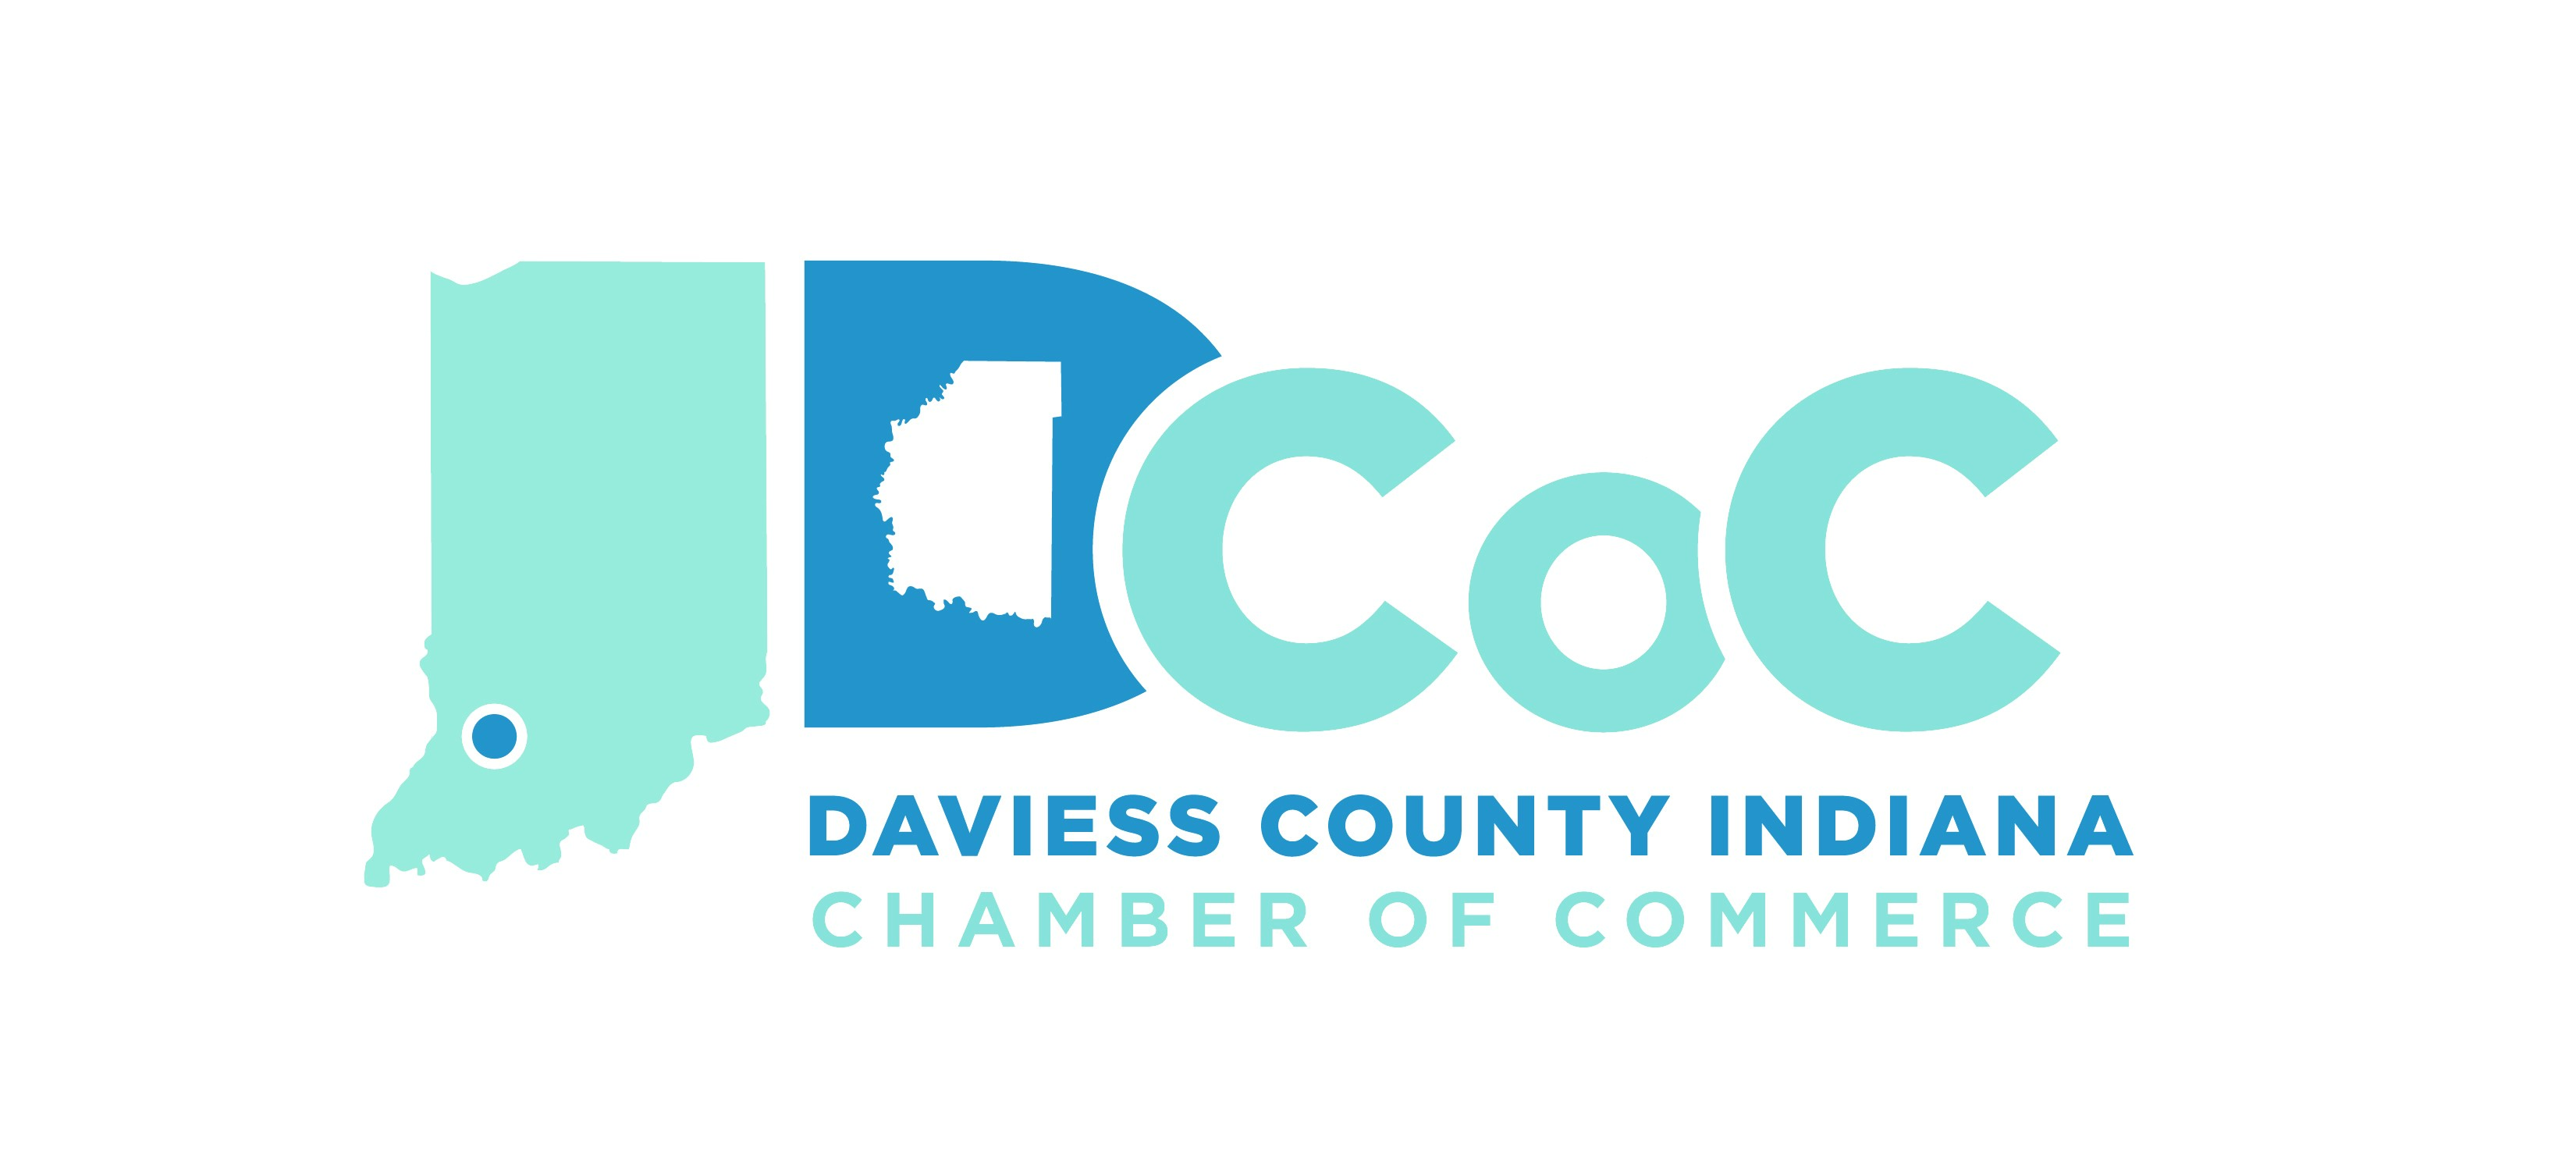 New Daviess County Chamber of Commerce logo reflects unified brand.